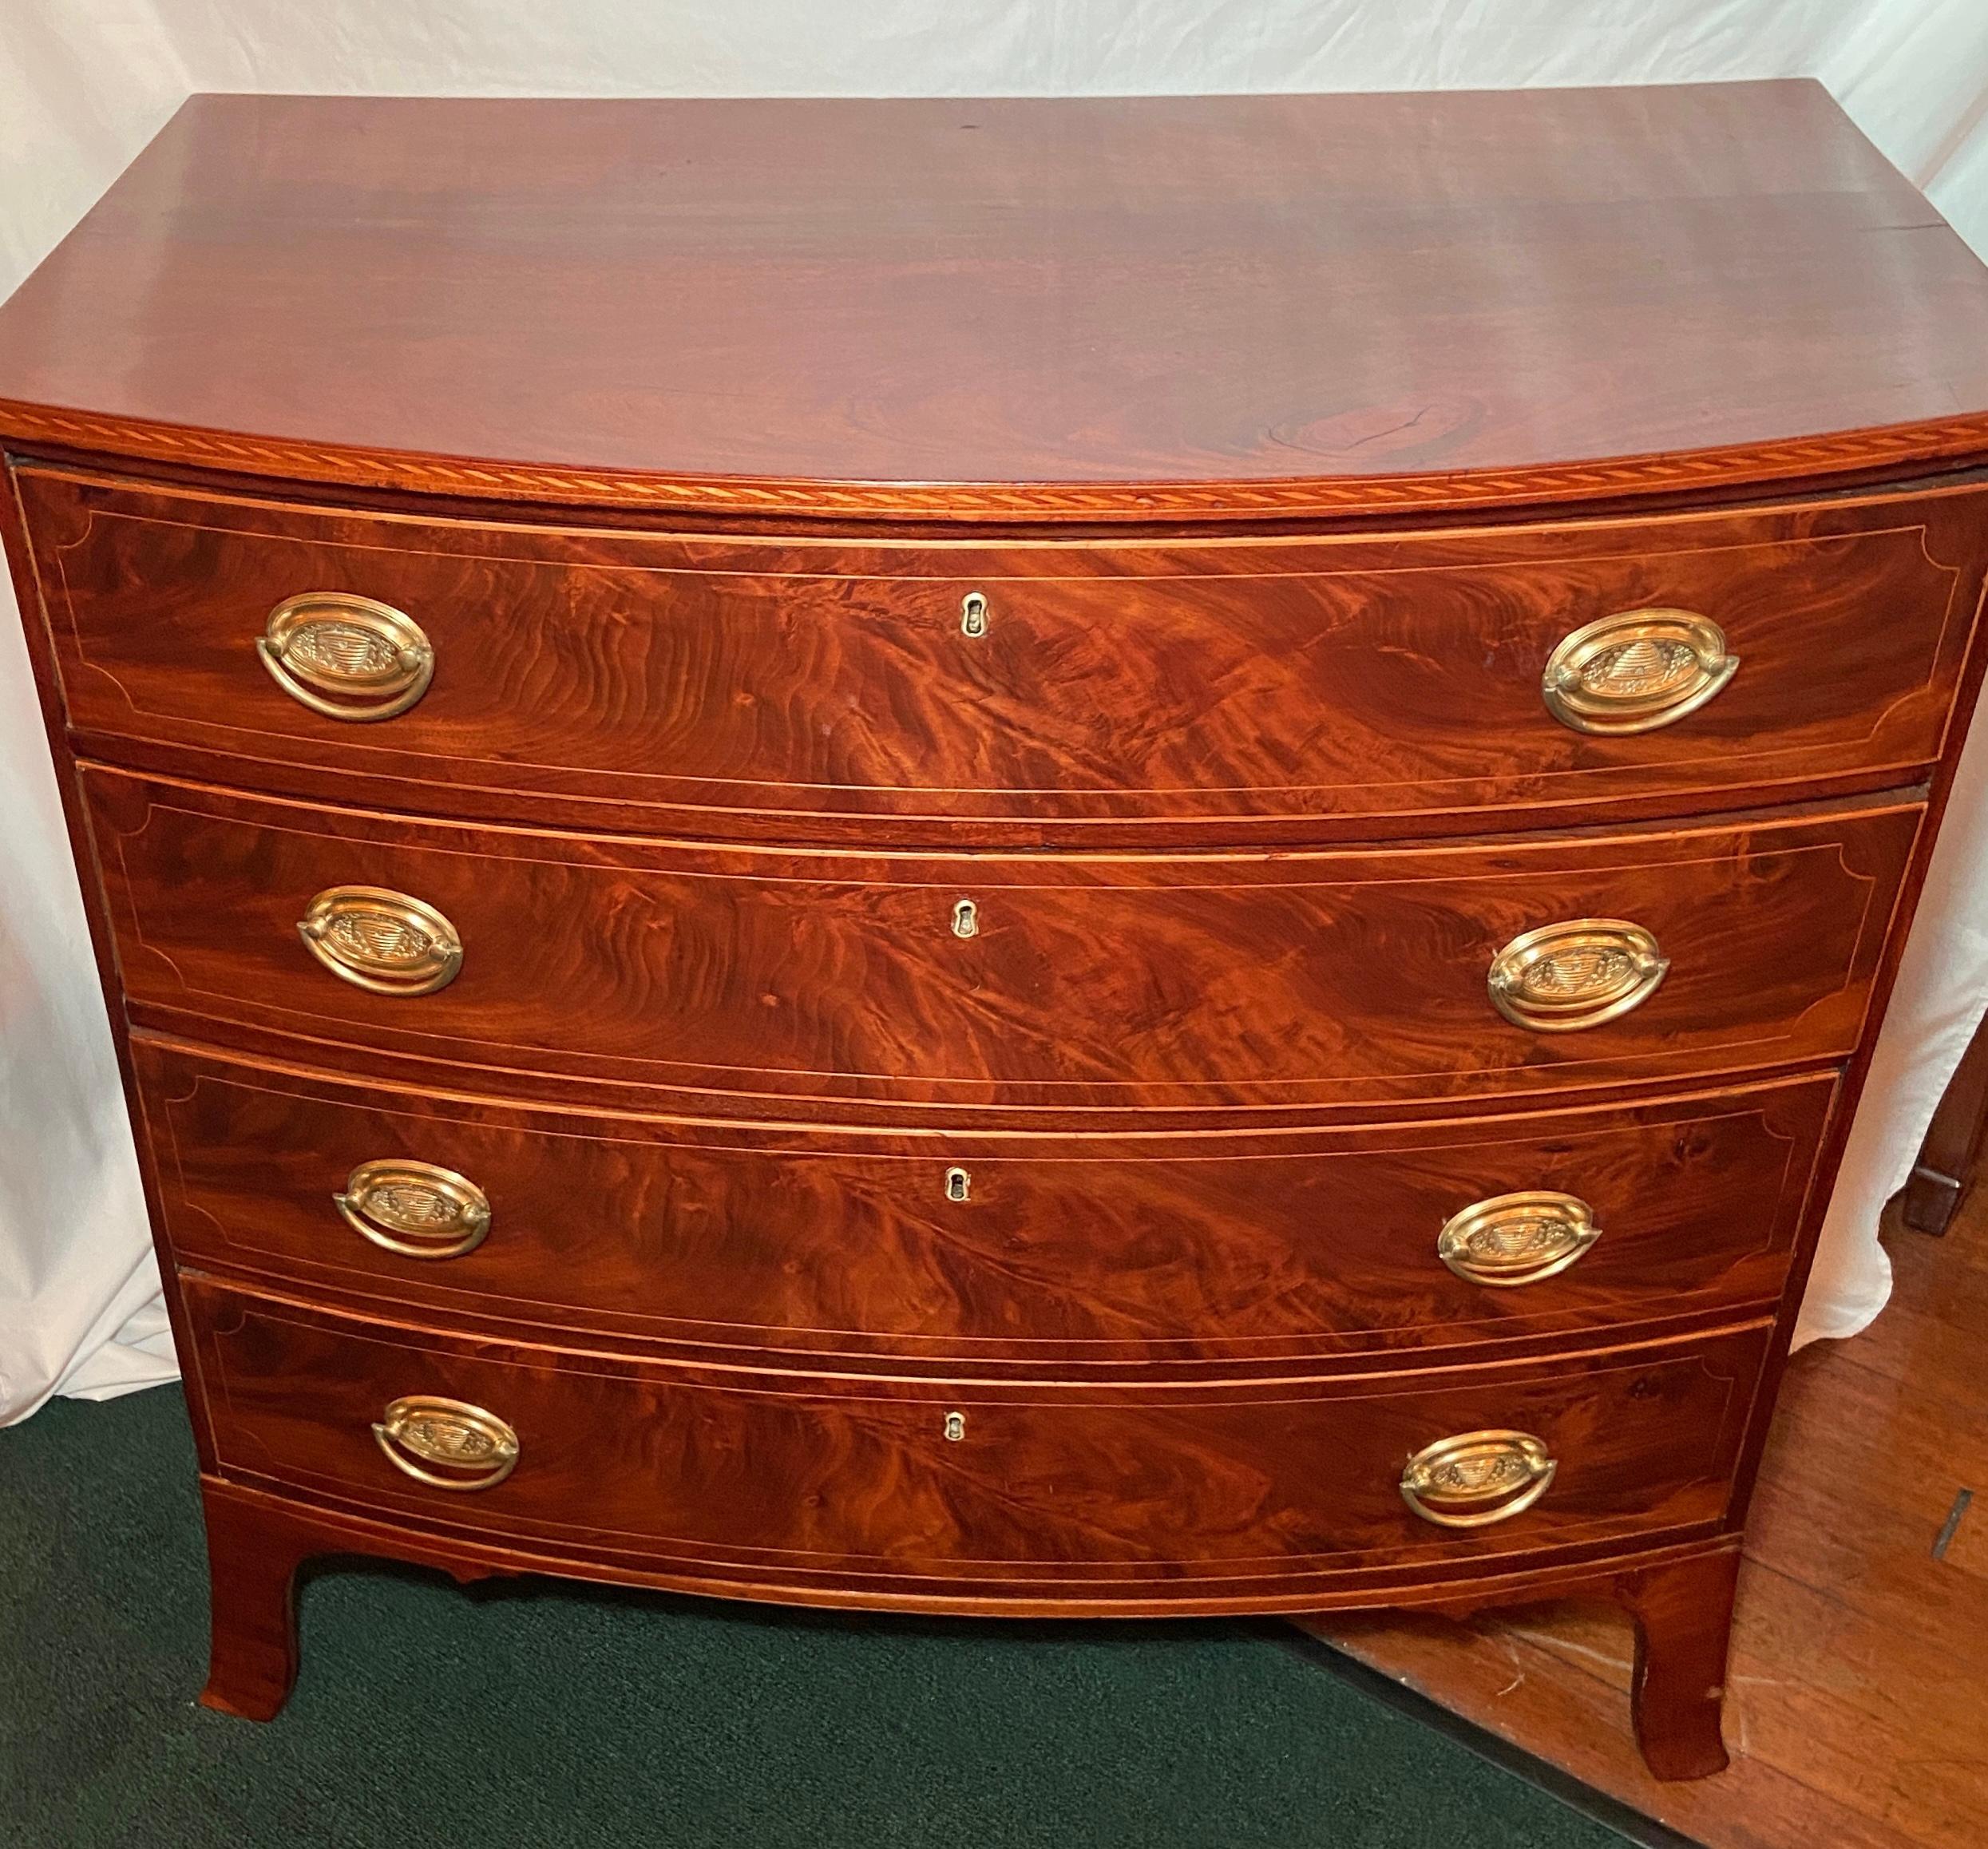 Antique English sheraton period bow-front chest of drawers, circa 1810-1820.